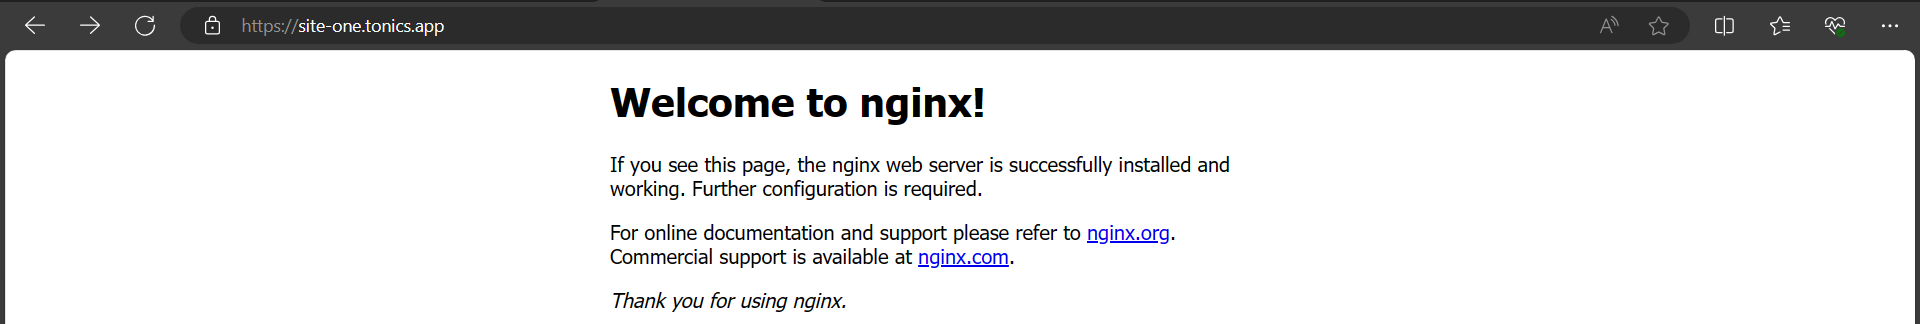 Welcome To NGINX message